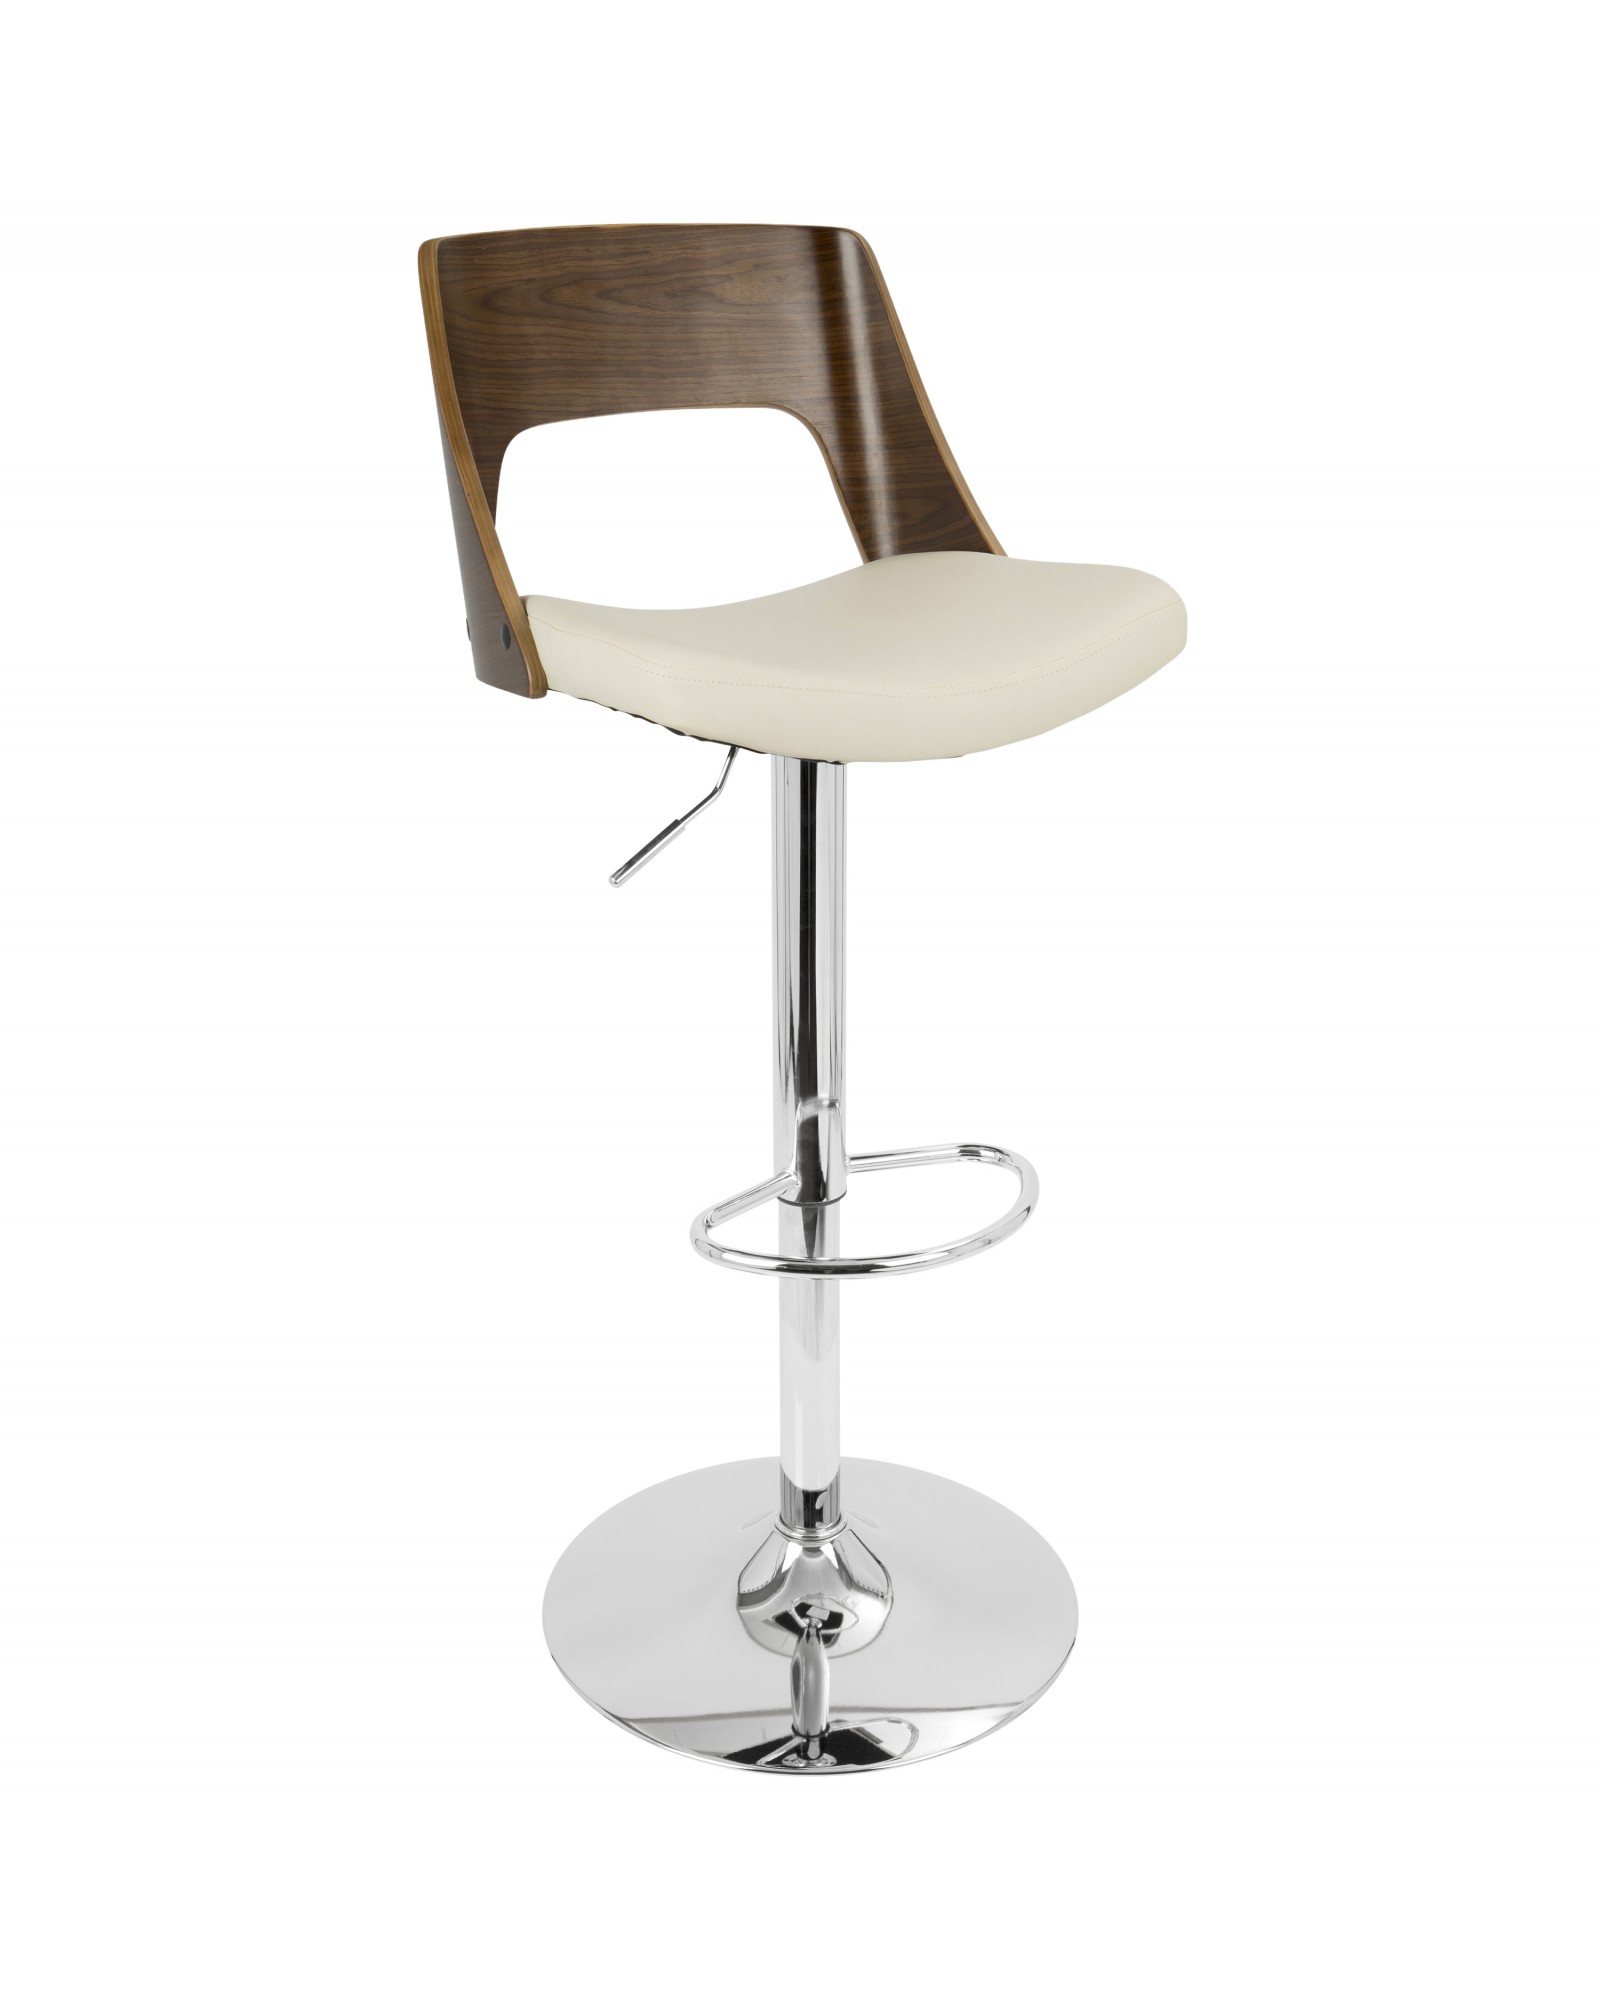 Valencia Mid-Century Modern Adjustable Barstool with Swivel in Walnut and Cream Faux Leather